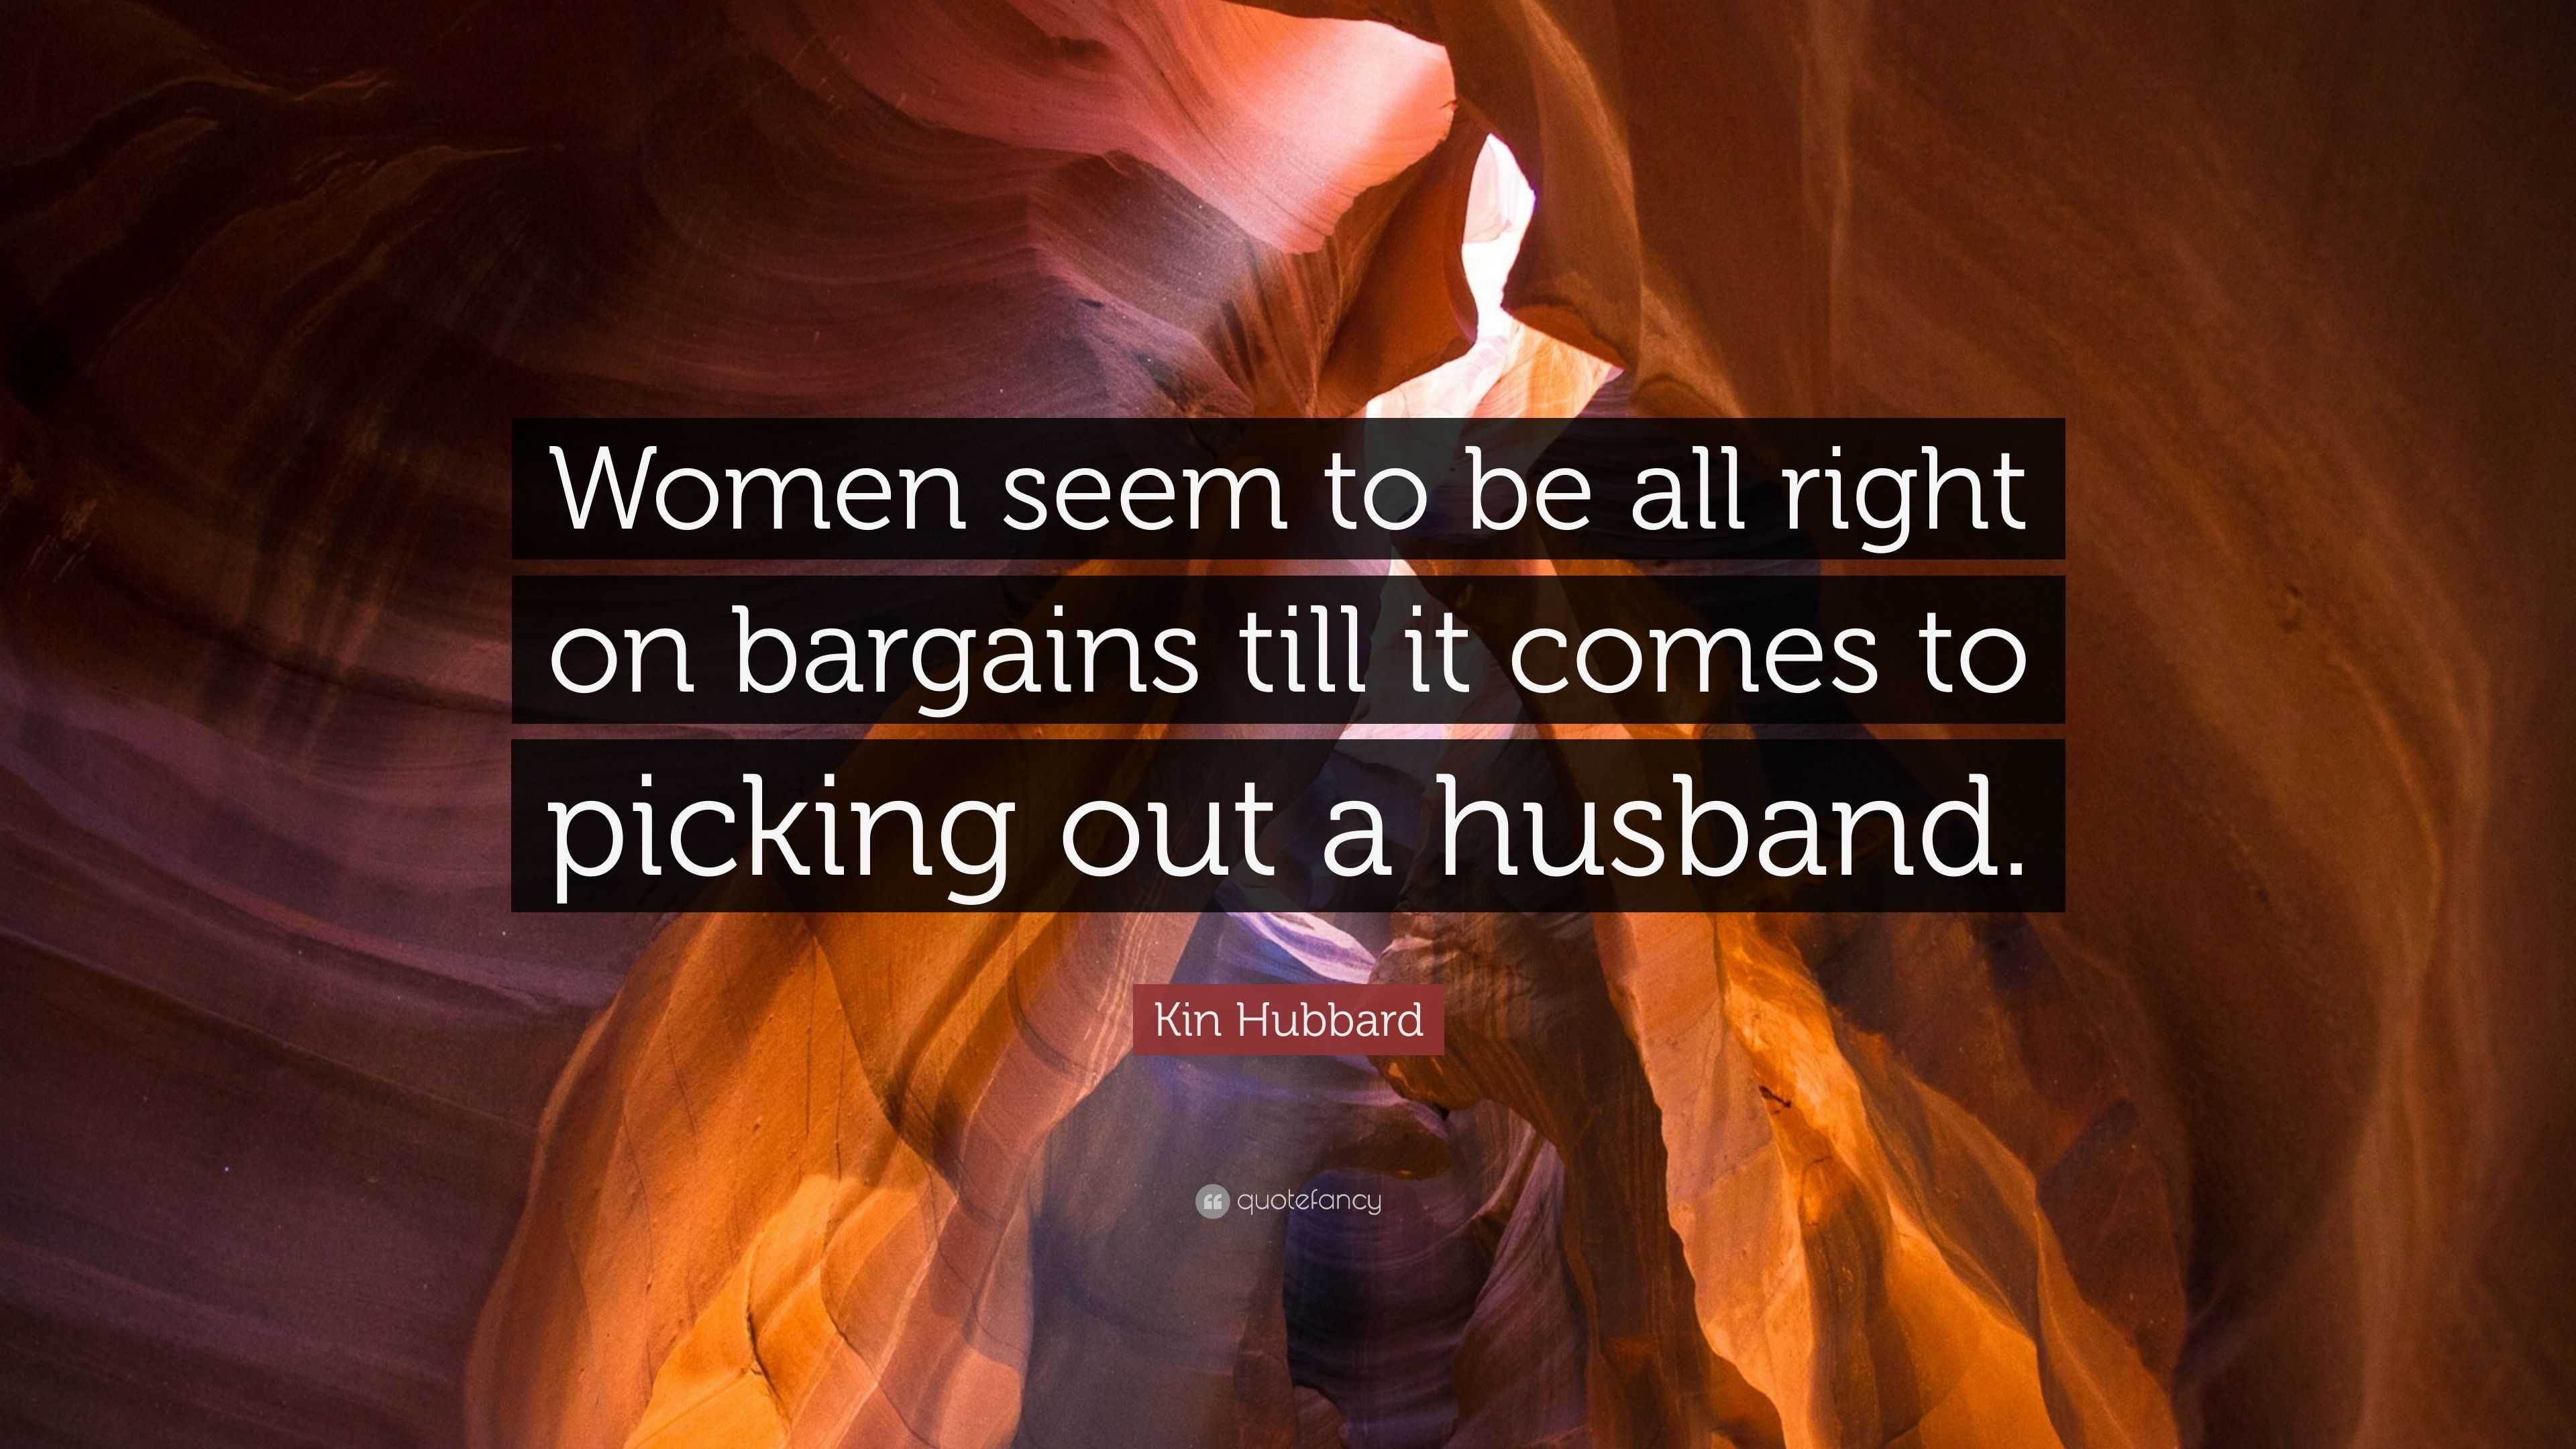 Kin Hubbard Quote: “Women seem to be all right on bargains till it comes to  picking